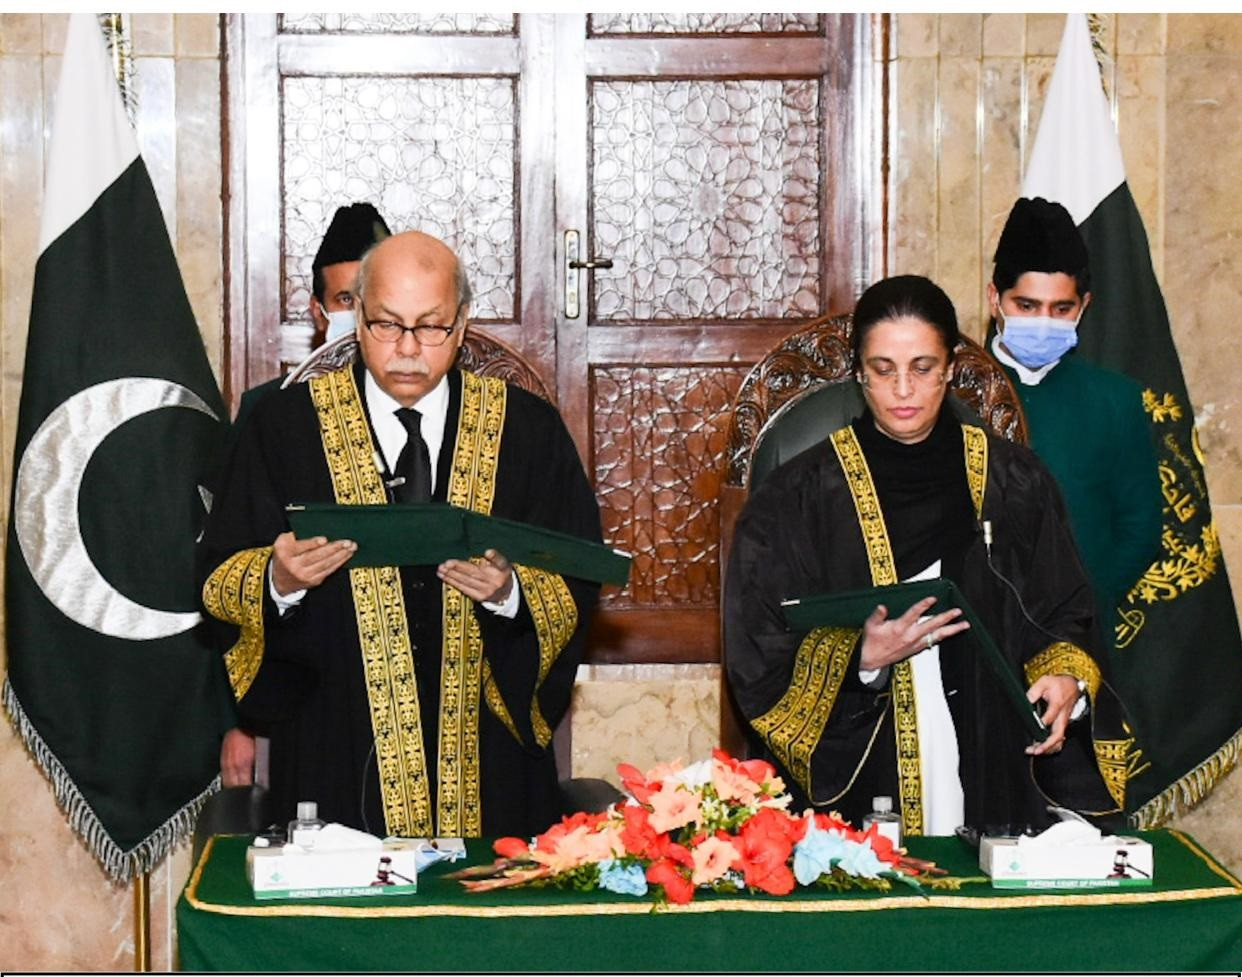 chief justice of pakistan gulzar ahmad administers the oath to justice ayesha malik as judge of the supreme court of pakistan in islamabad on january 24 2022 photo supreme court of pakistan